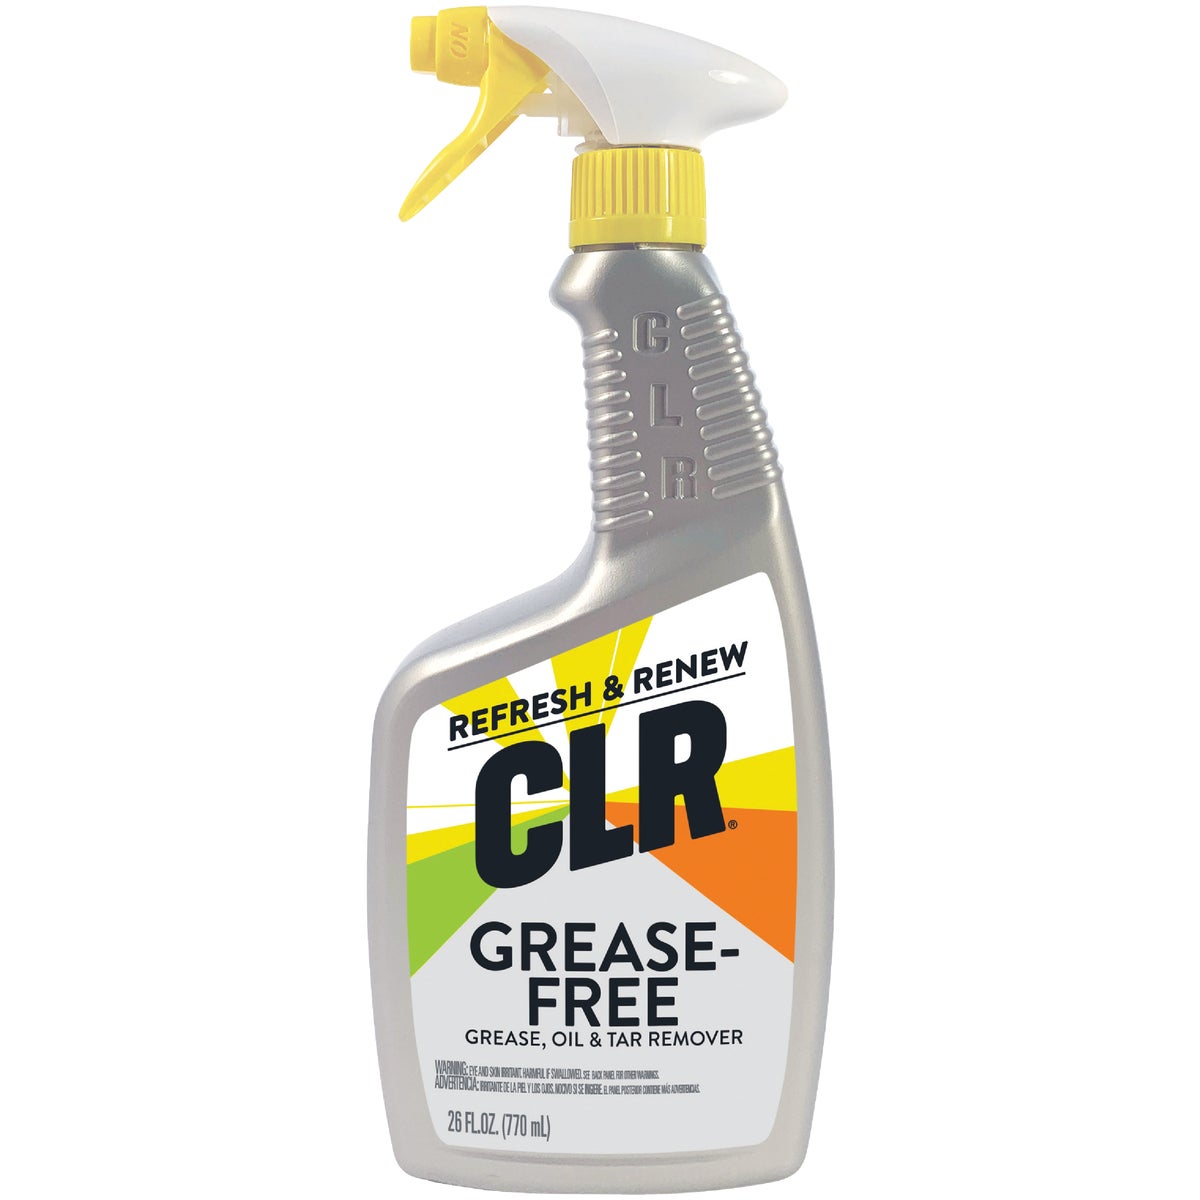 CLR 26 Oz. Grease Free Garage Strength All-Purpose Cleaner